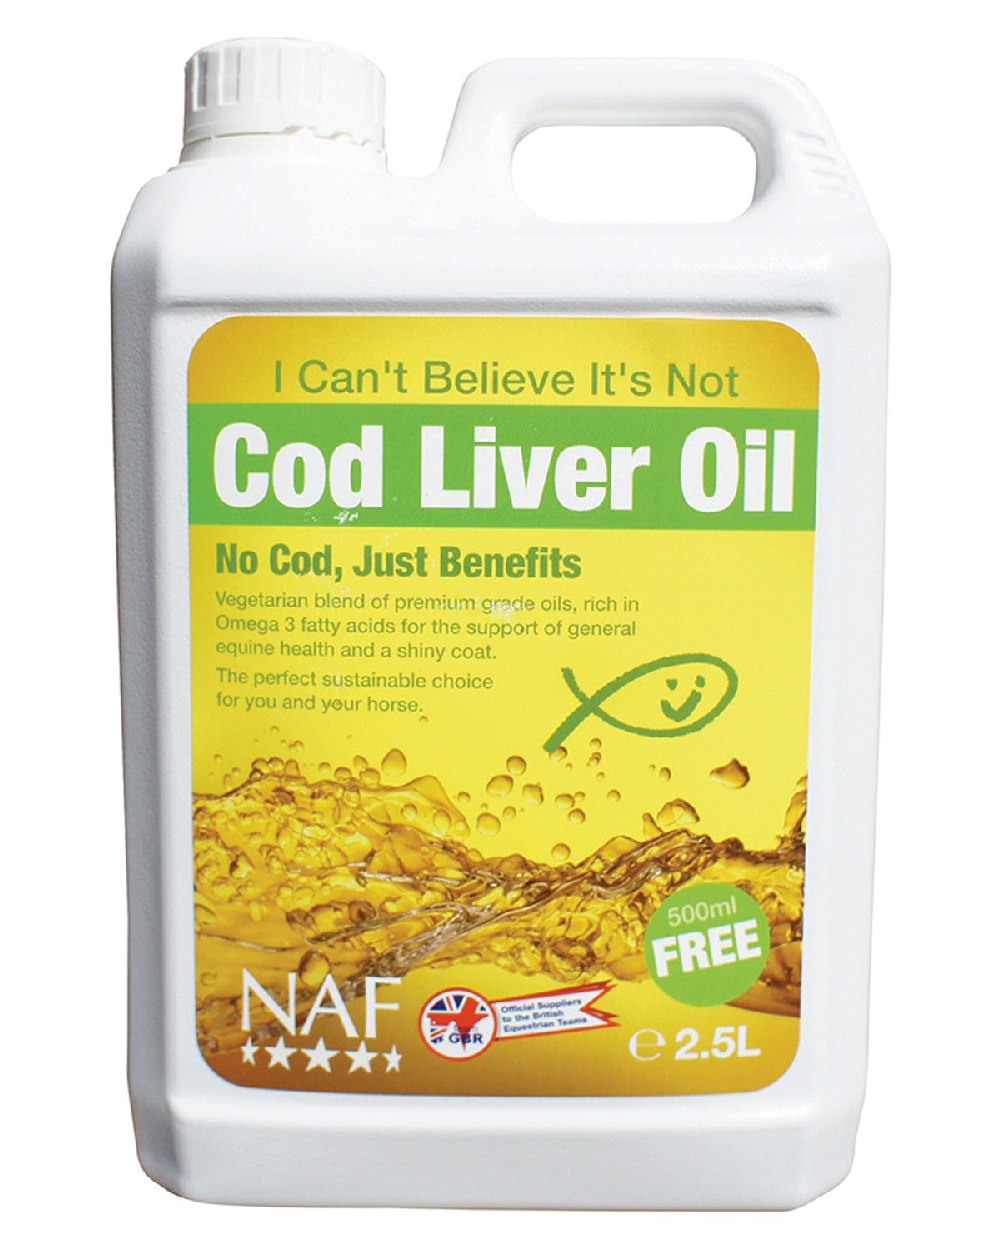 NAF I Cant Believe Its Not Cod Liver Oil 2.5lt on white background